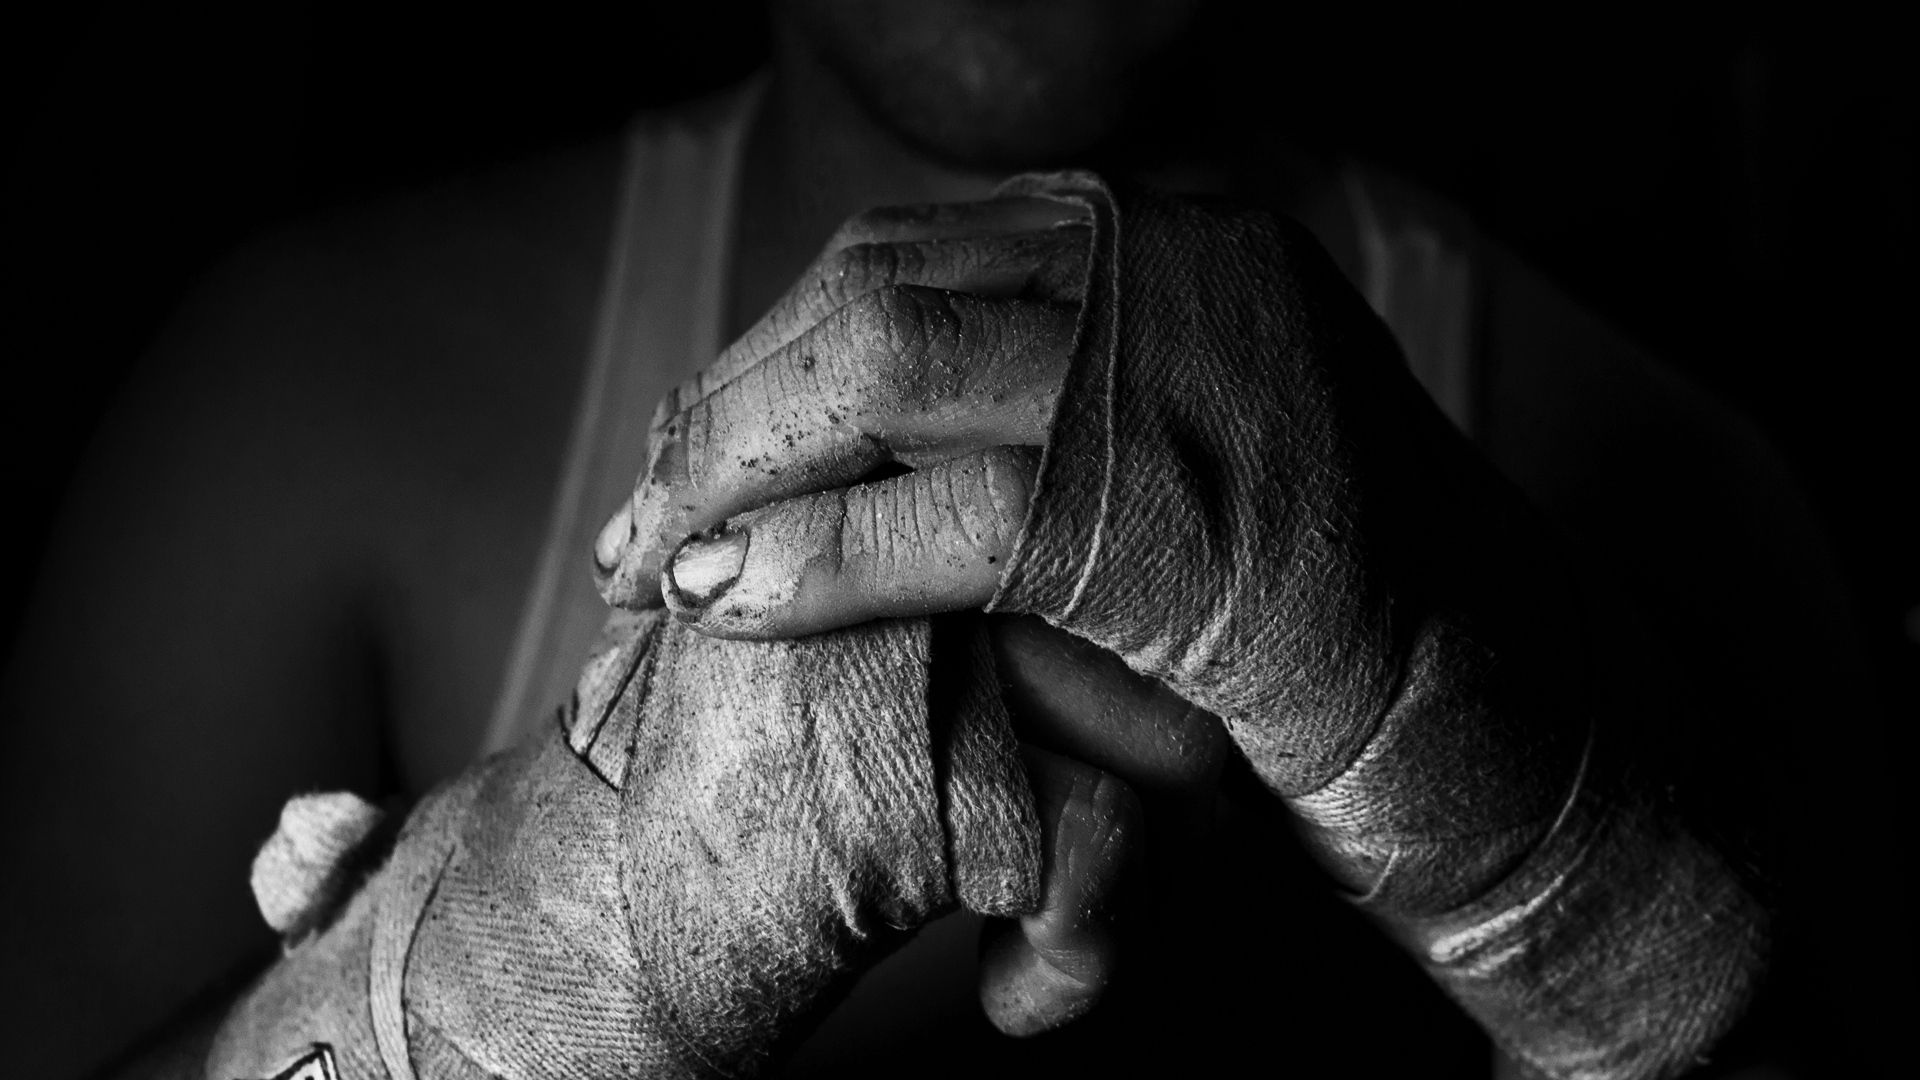 Mobile wallpaper sports, chb, hands, bw, fighter, bandages